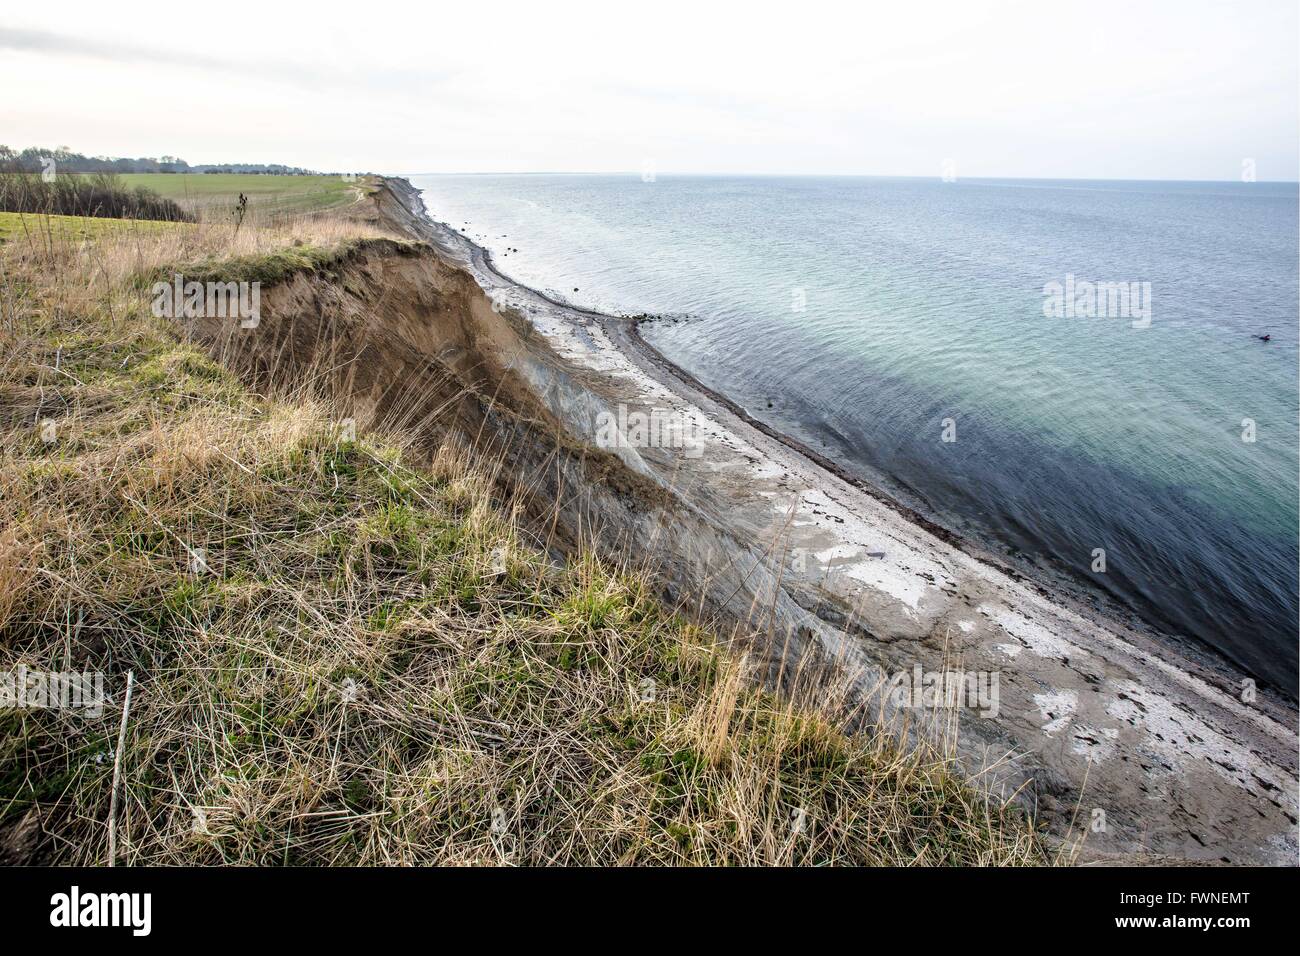 Cliff coast at the baltic sea in nothern germany Stock Photo